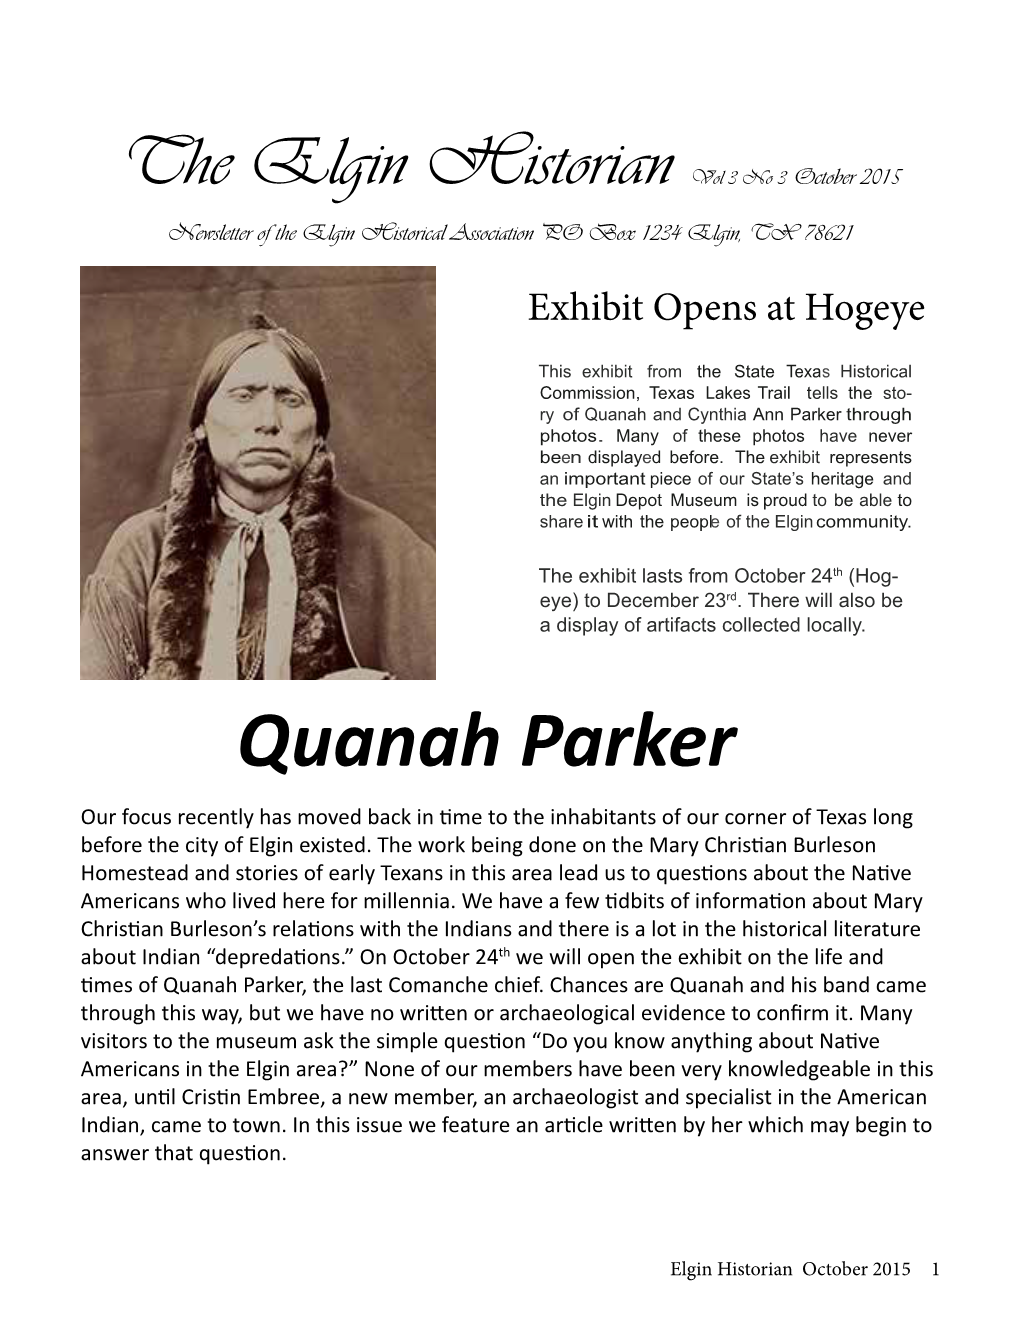 Quanah Parker Our Focus Recently Has Moved Back in Time to the Inhabitants of Our Corner of Texas Long Before the City of Elgin Existed